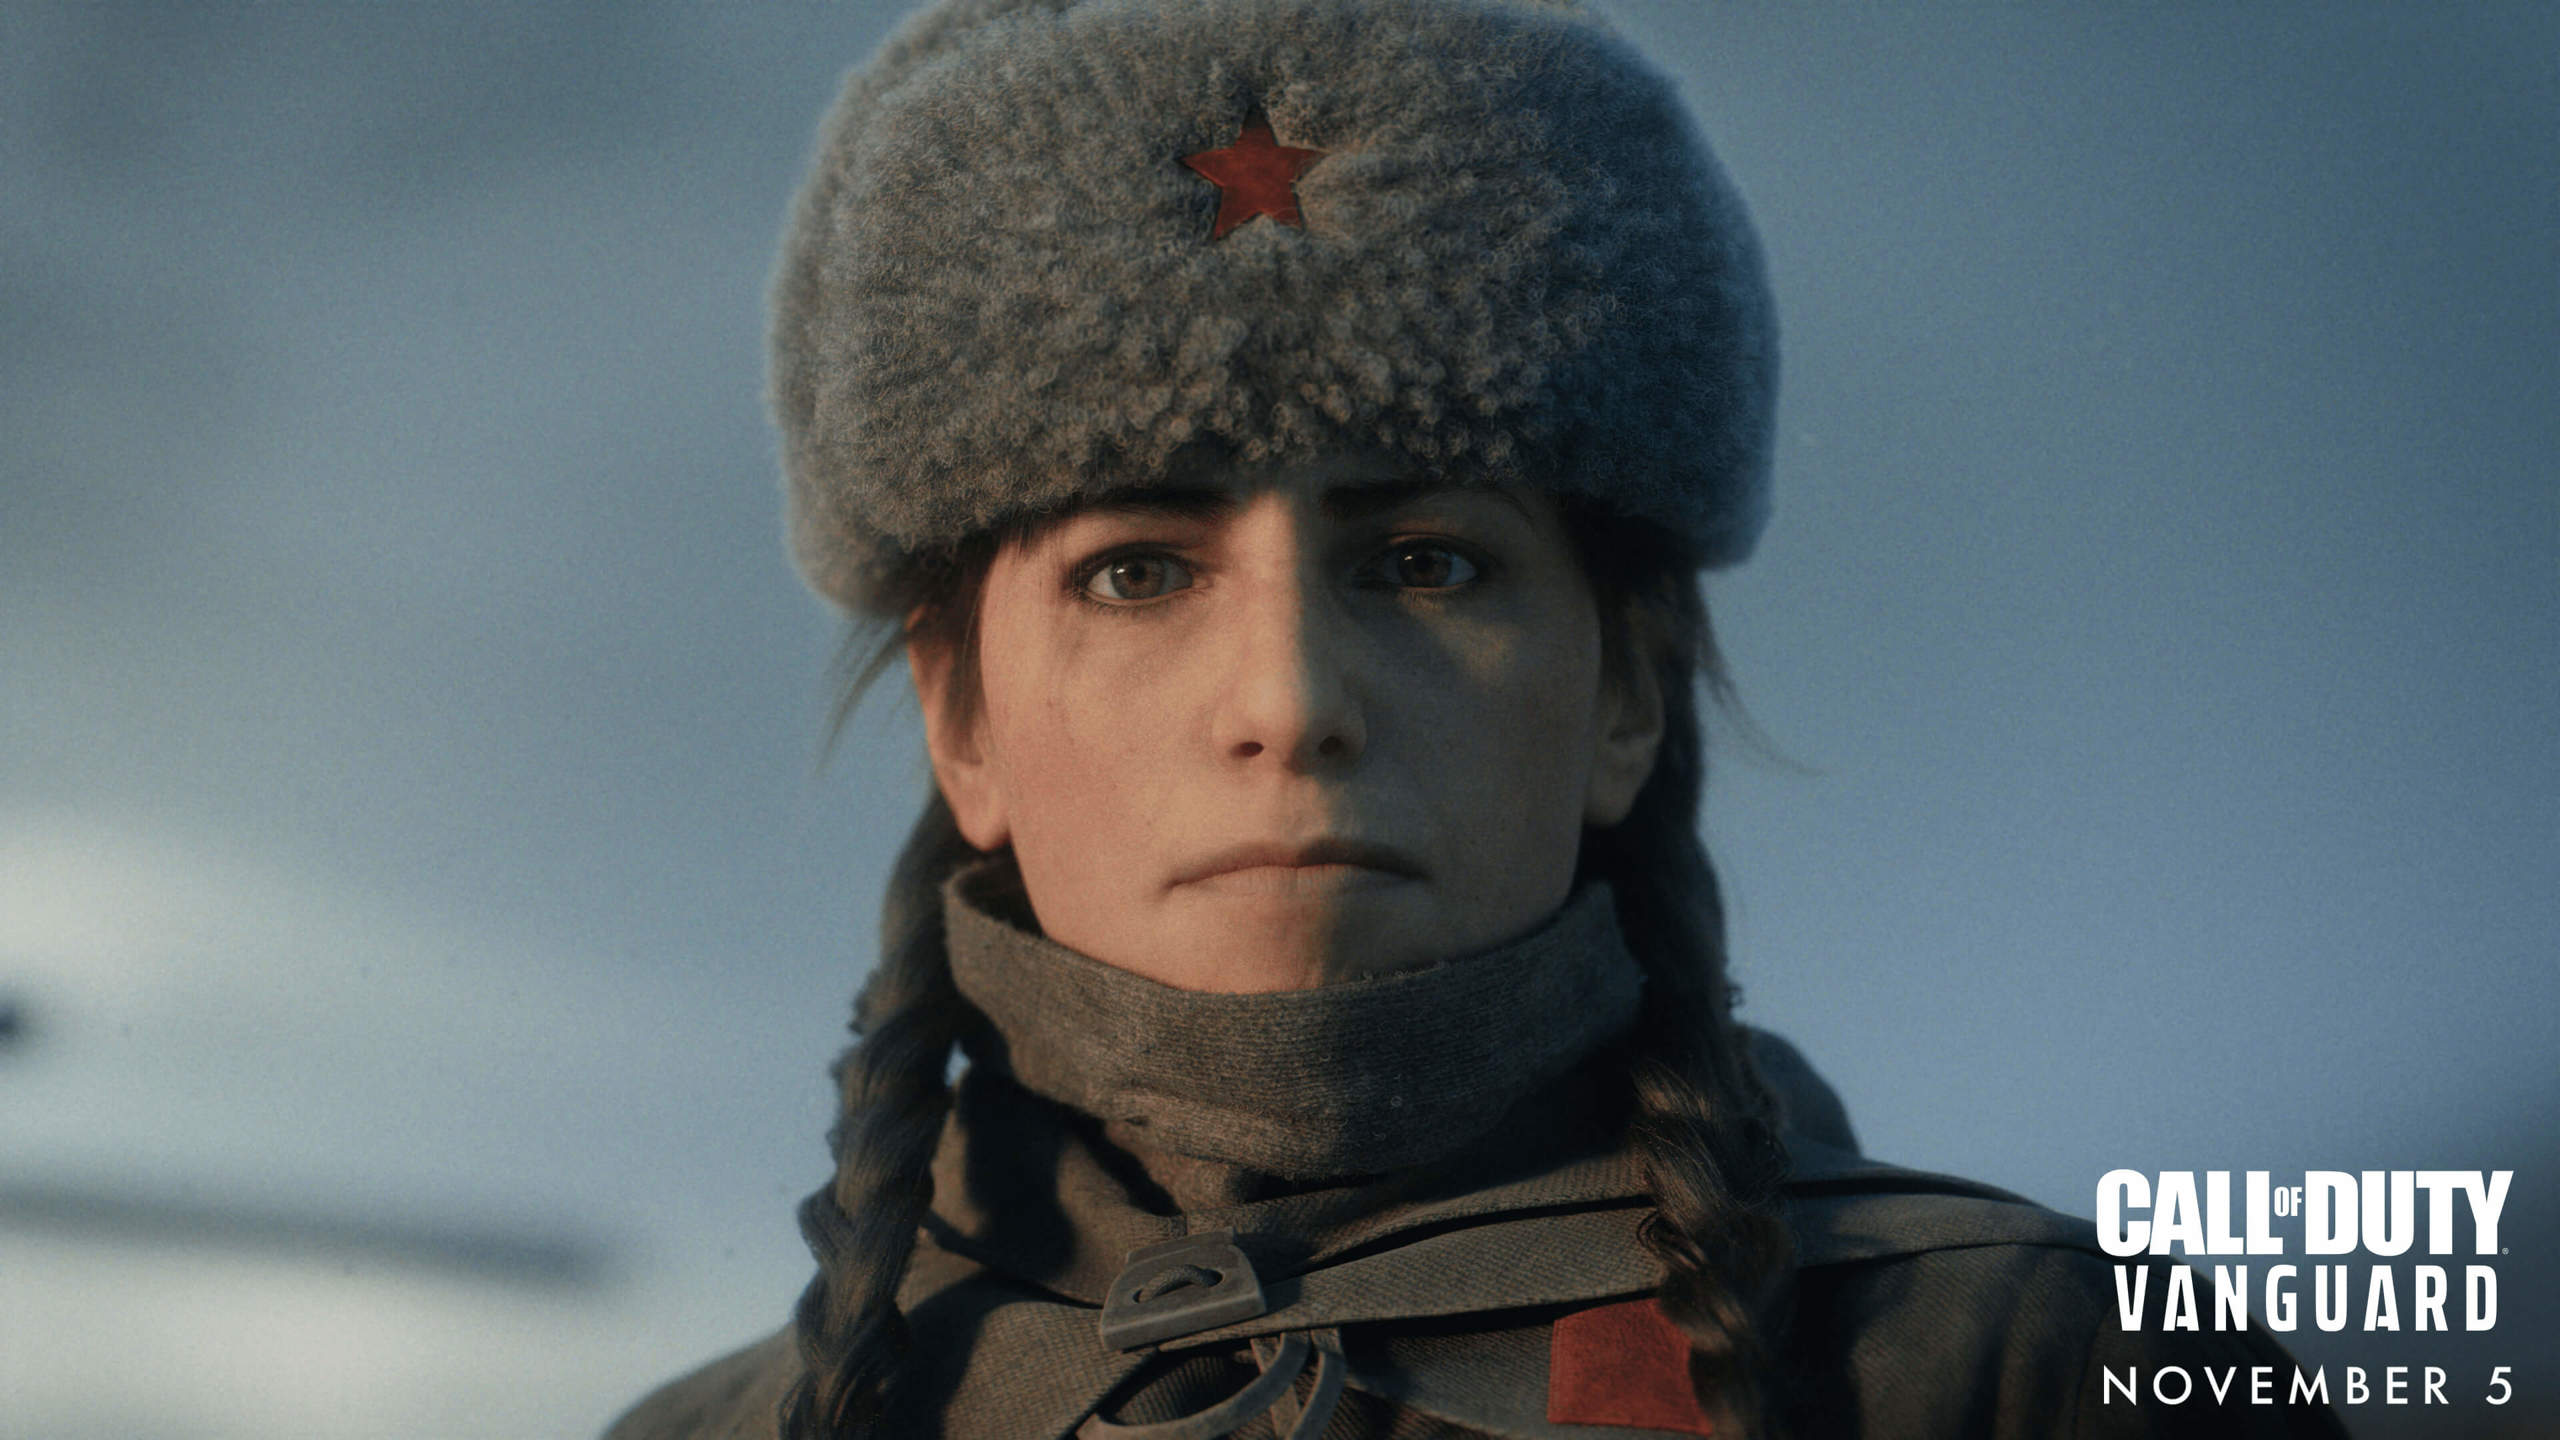 Character from Call of Duty: Vanguaed, wearing army gear and an ushanka hat.